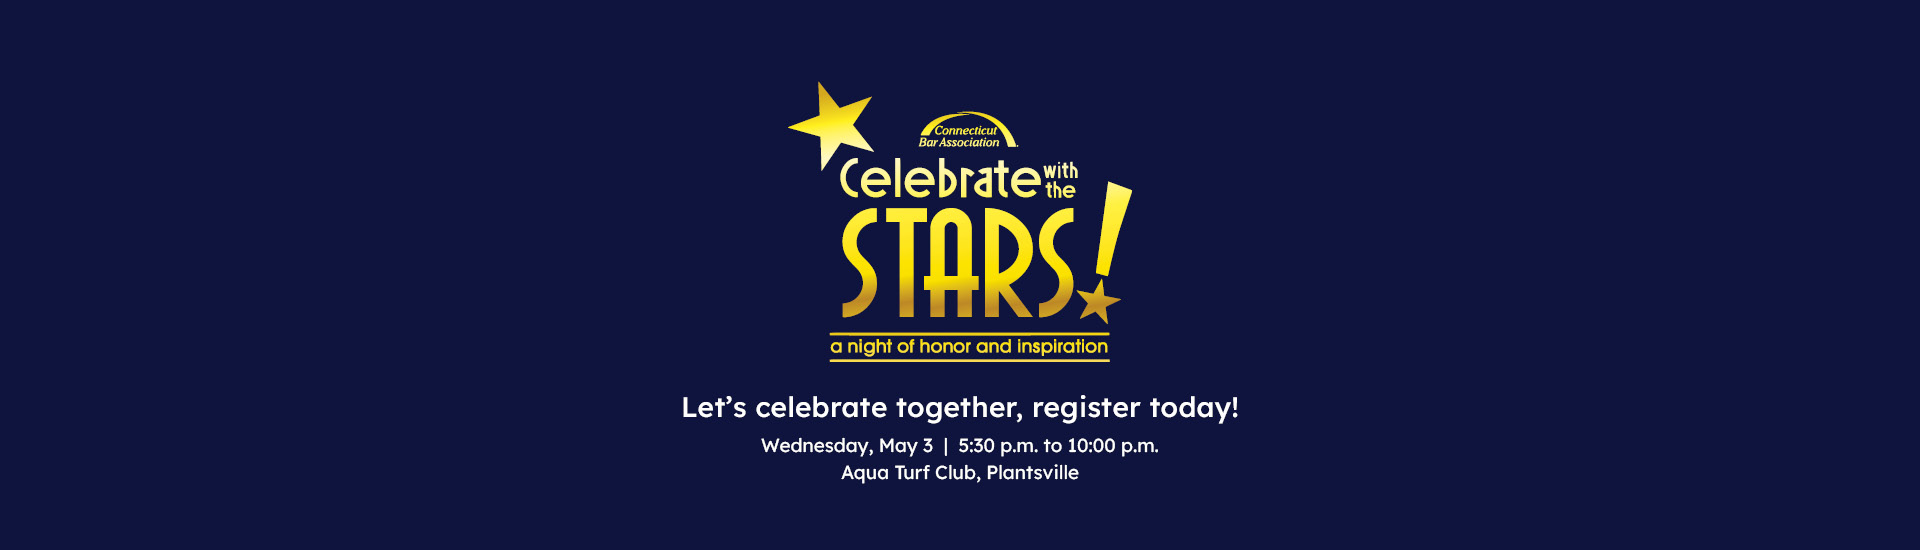 Celebrate with the Stars 1920x550